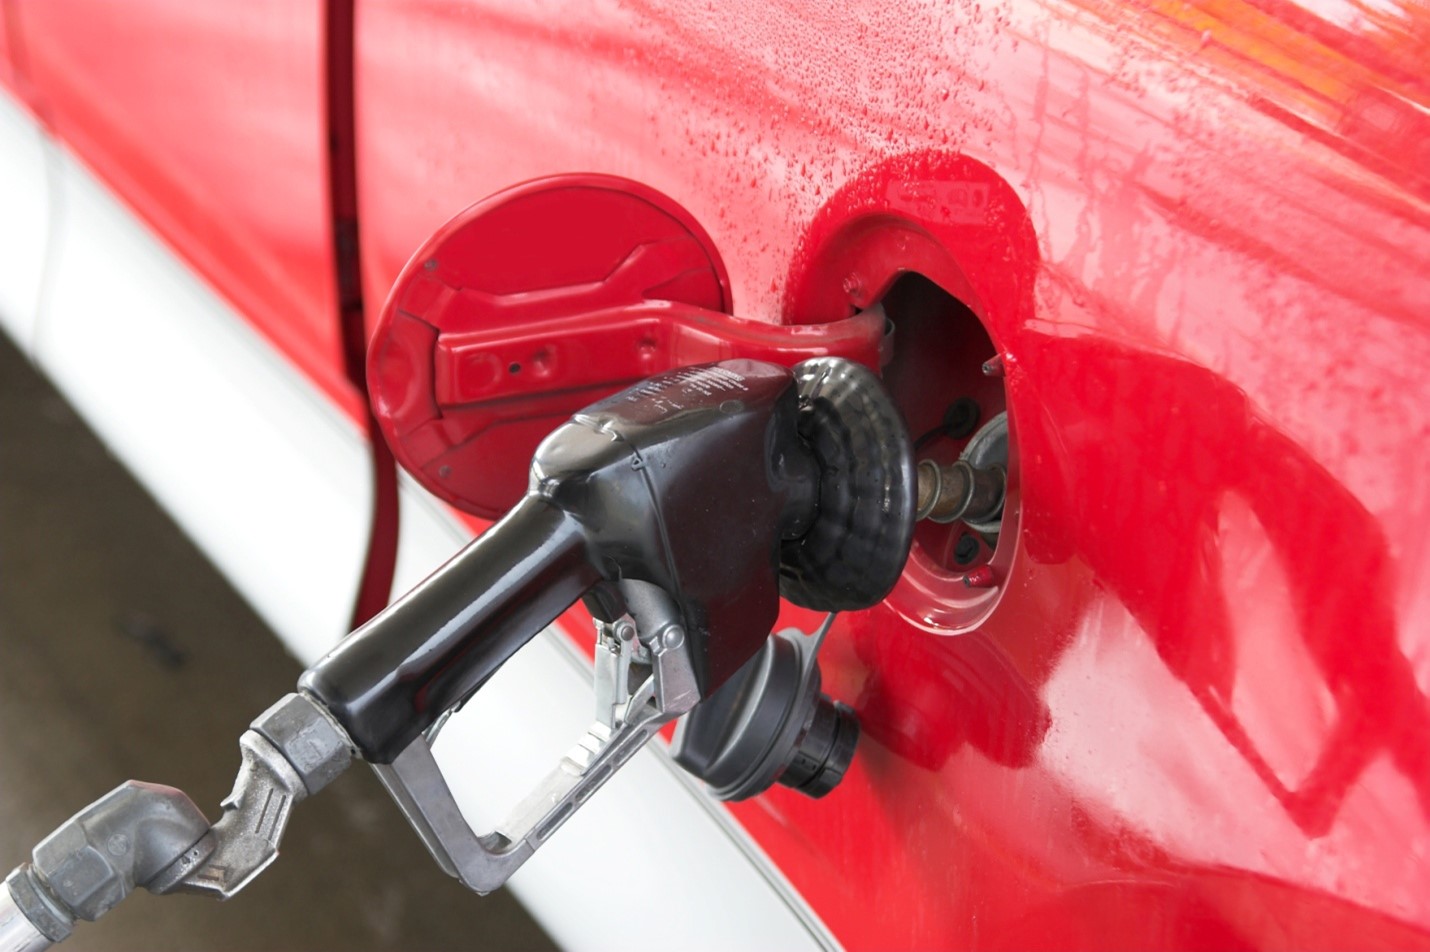 Gas pumping into a red vehicle